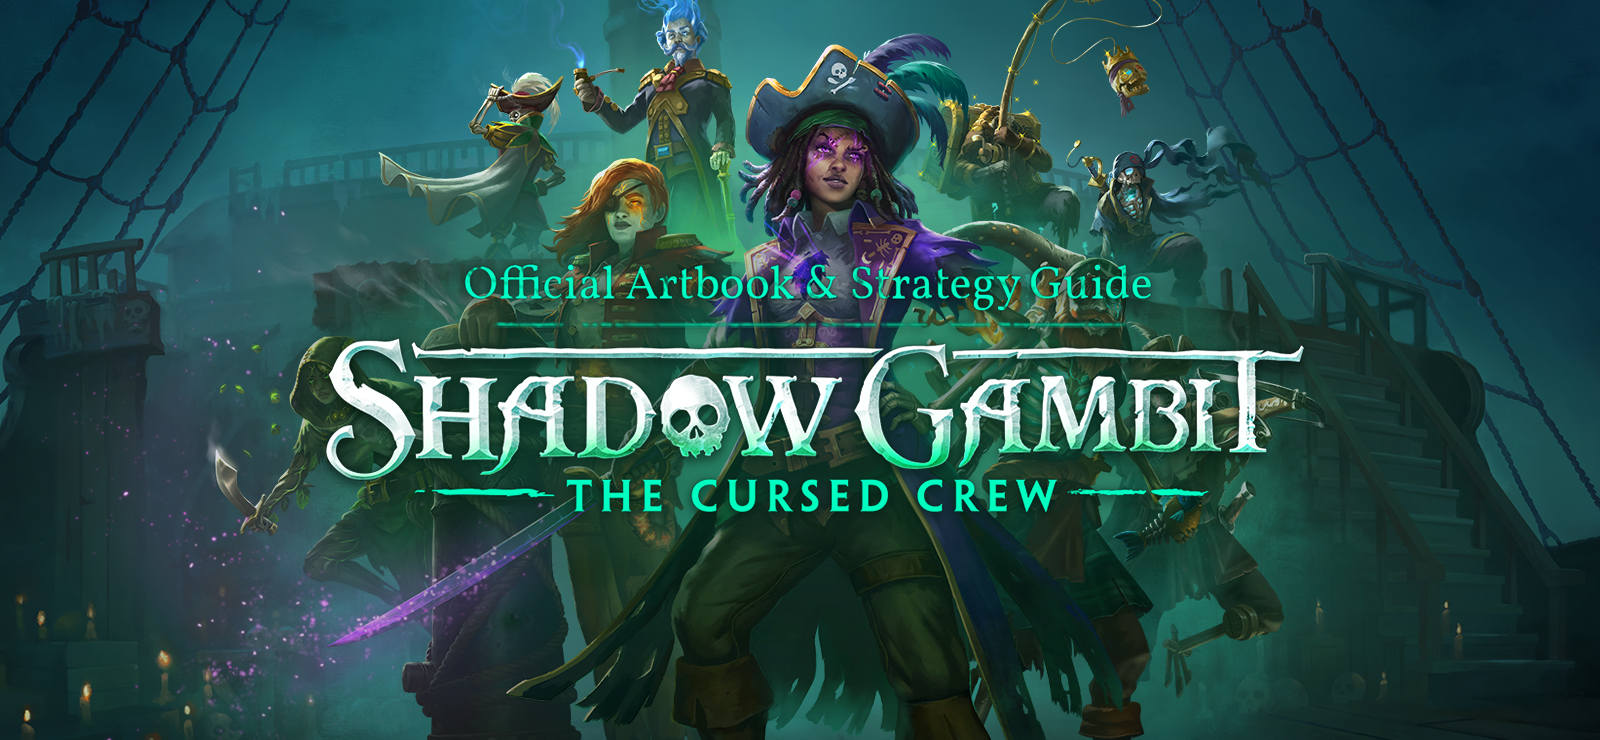 Shadow Gambit: The Cursed Crew - Artbook & Strategy Guide